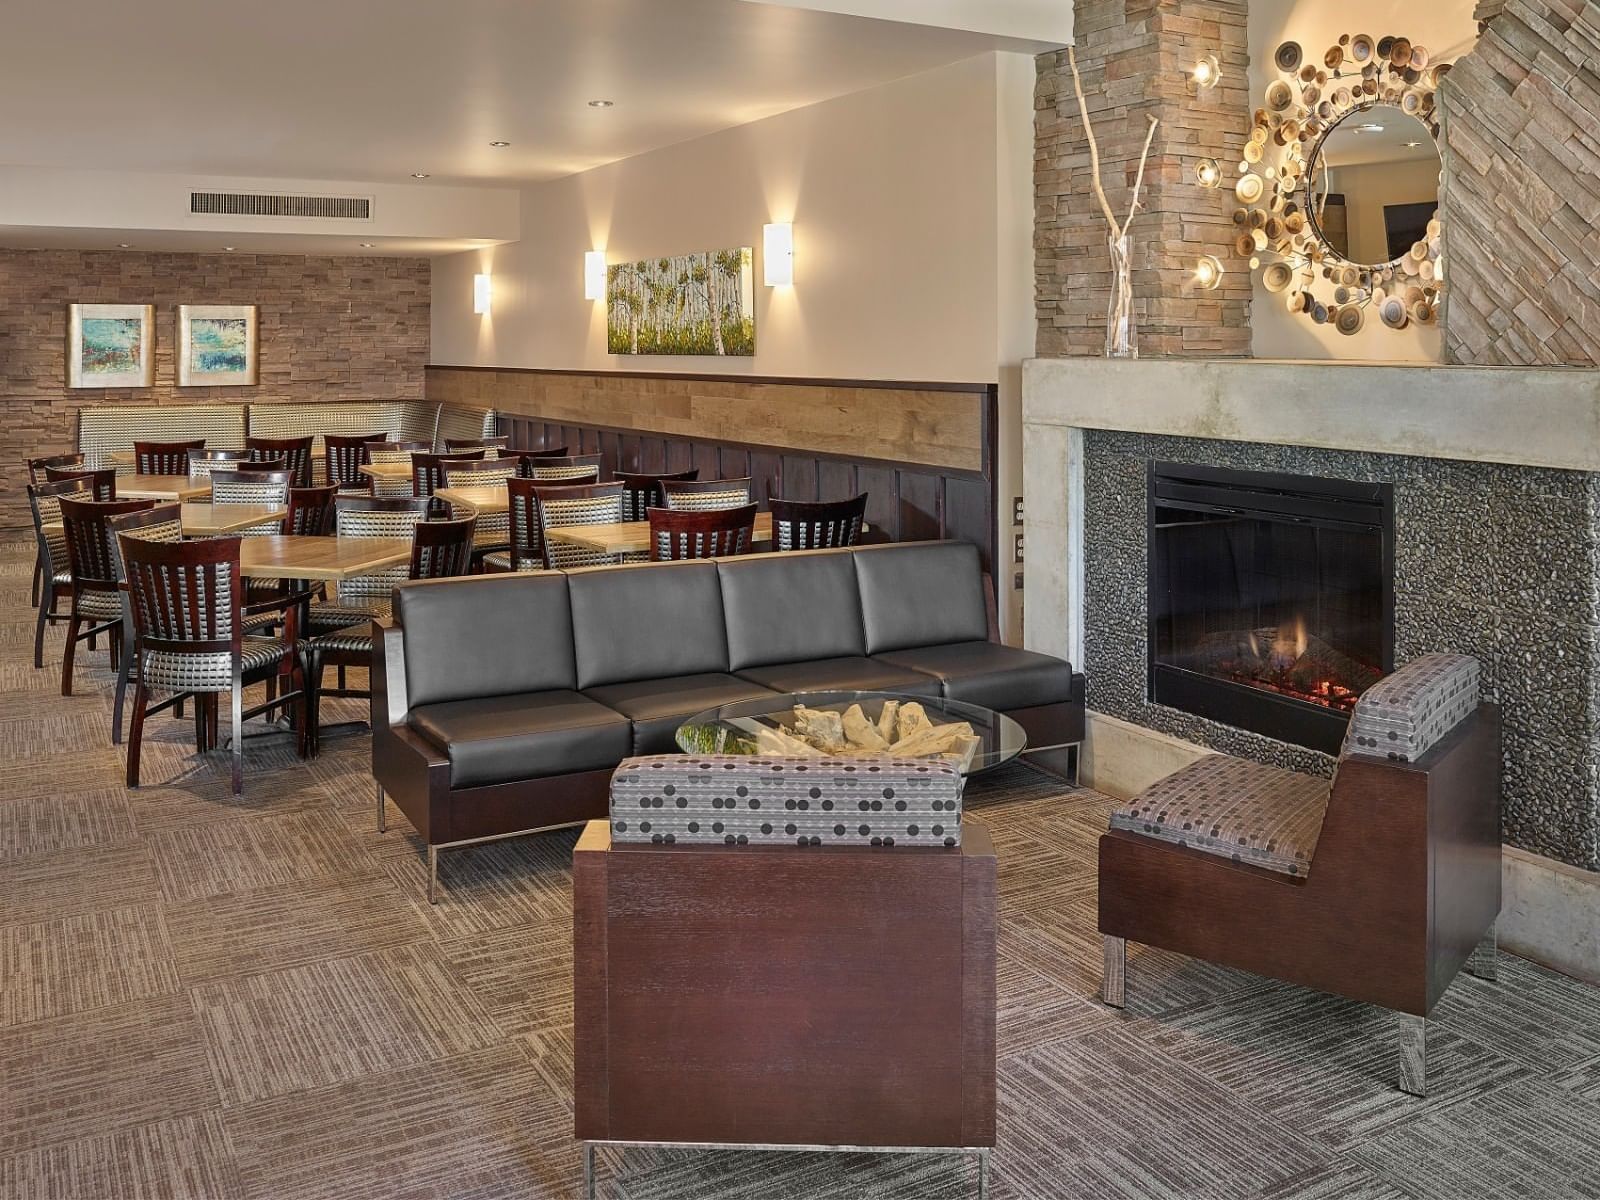 Hotel Lounge and dining area at Varscona Hotel on Whyte